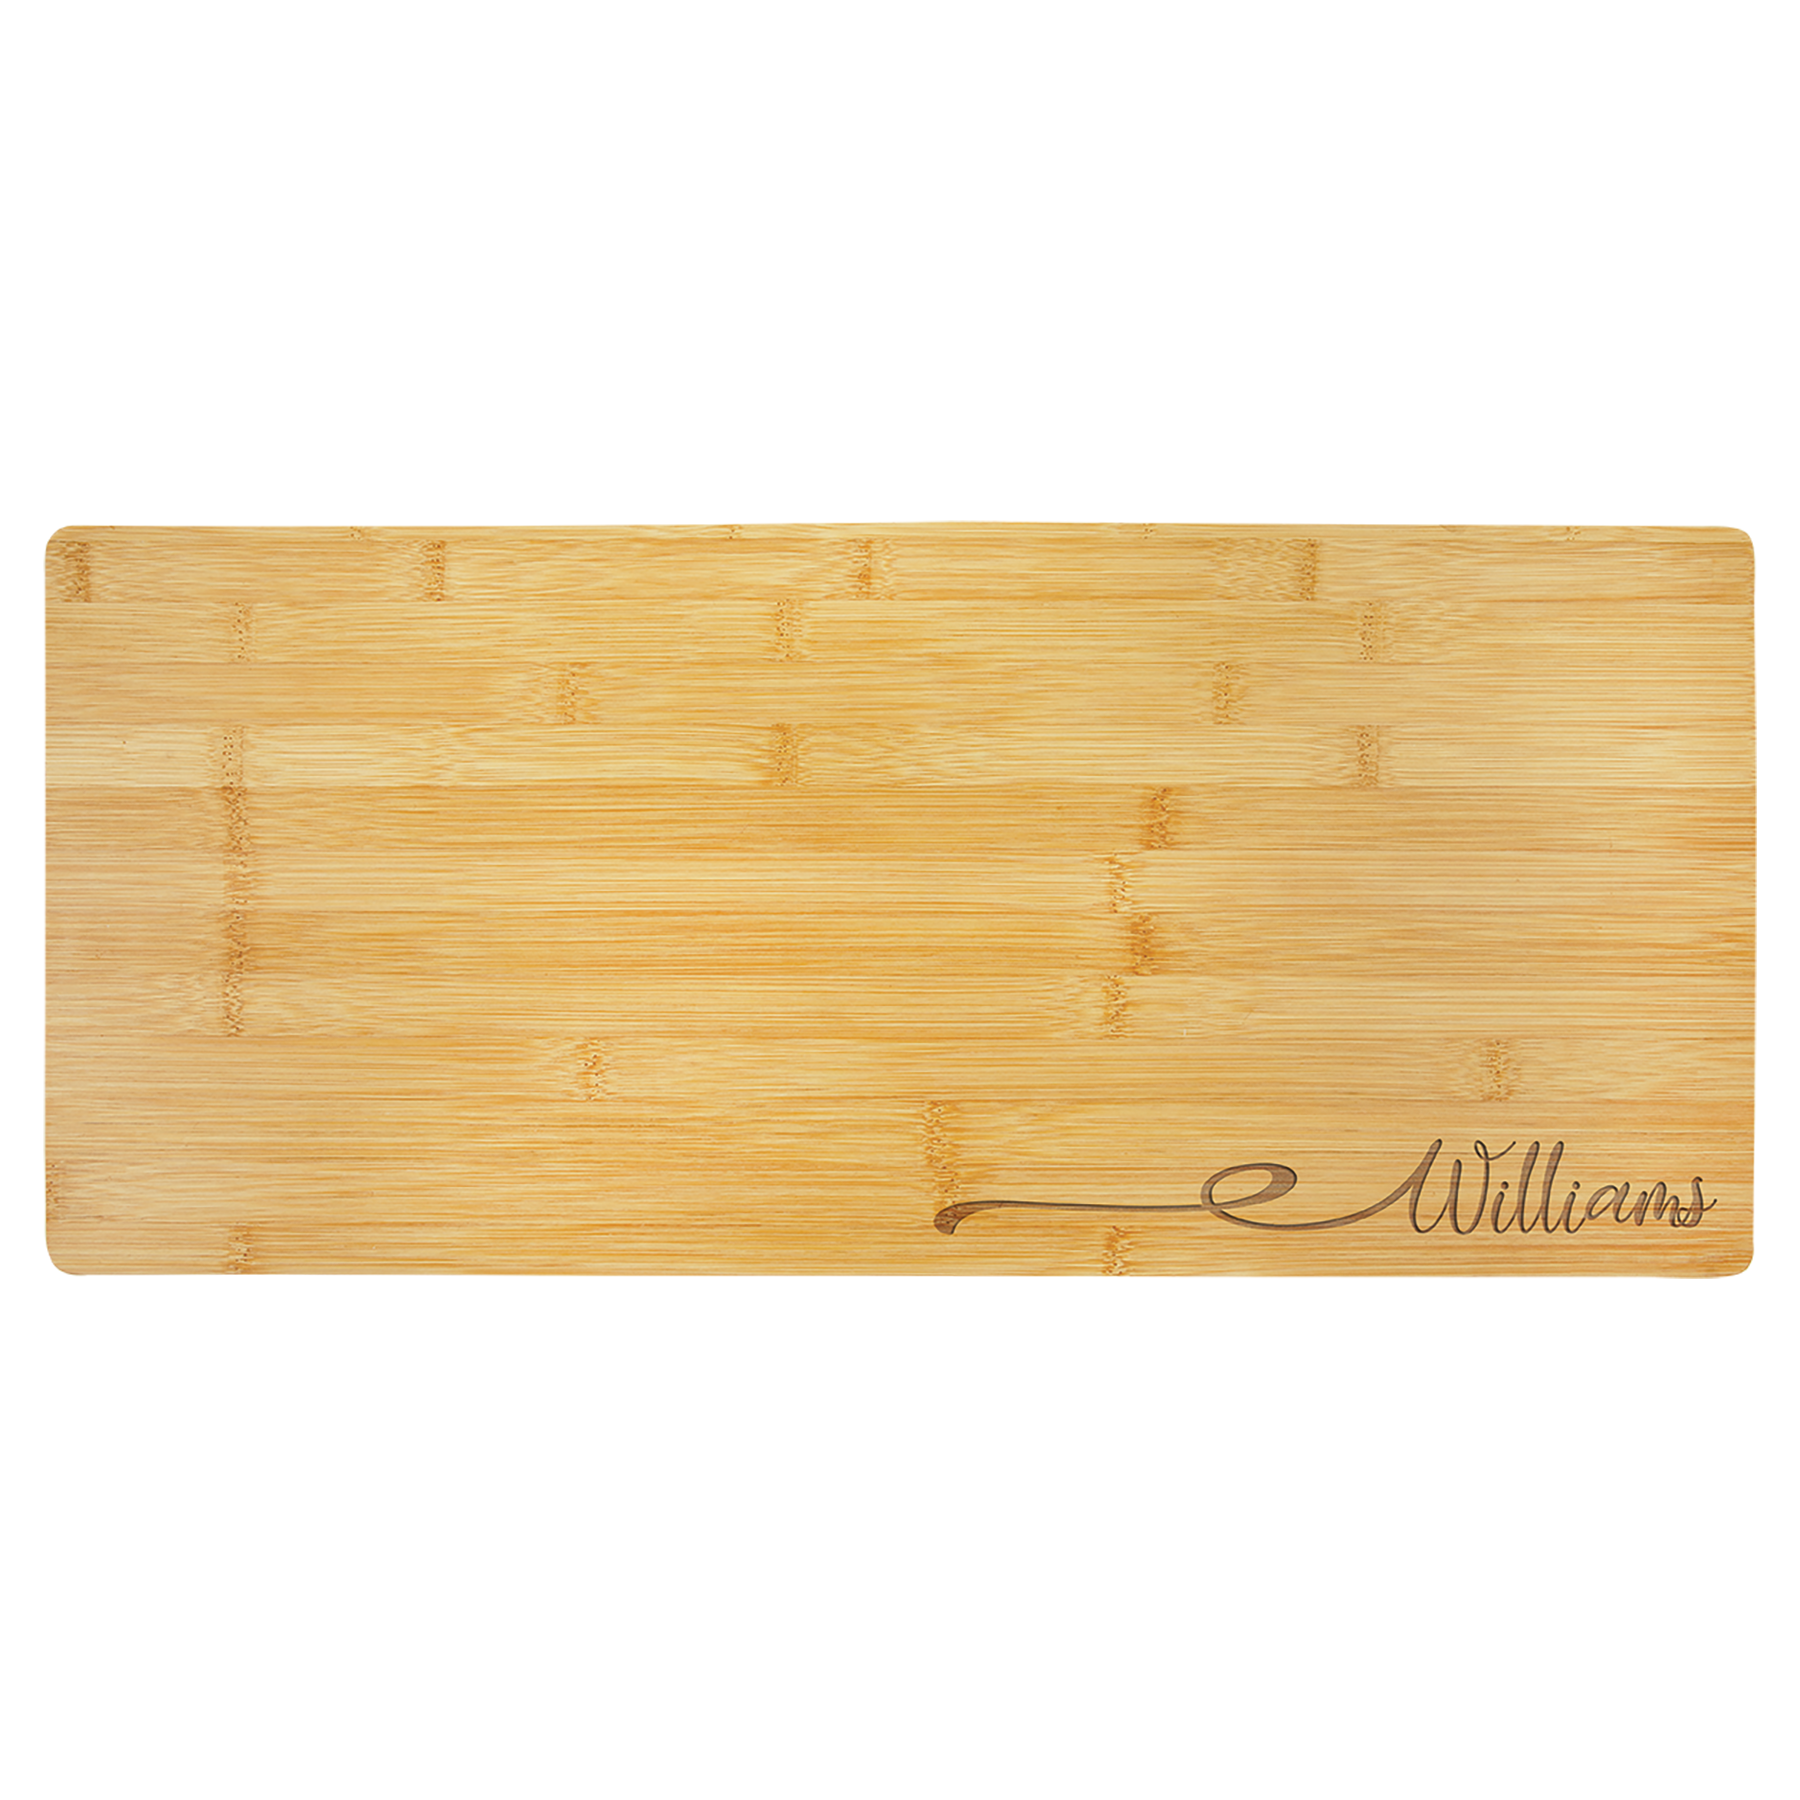 Bamboo Charcuterie Board/Cutting Board, 23-3/4" x 10", Laser Engraved - Craftworks NW, LLC